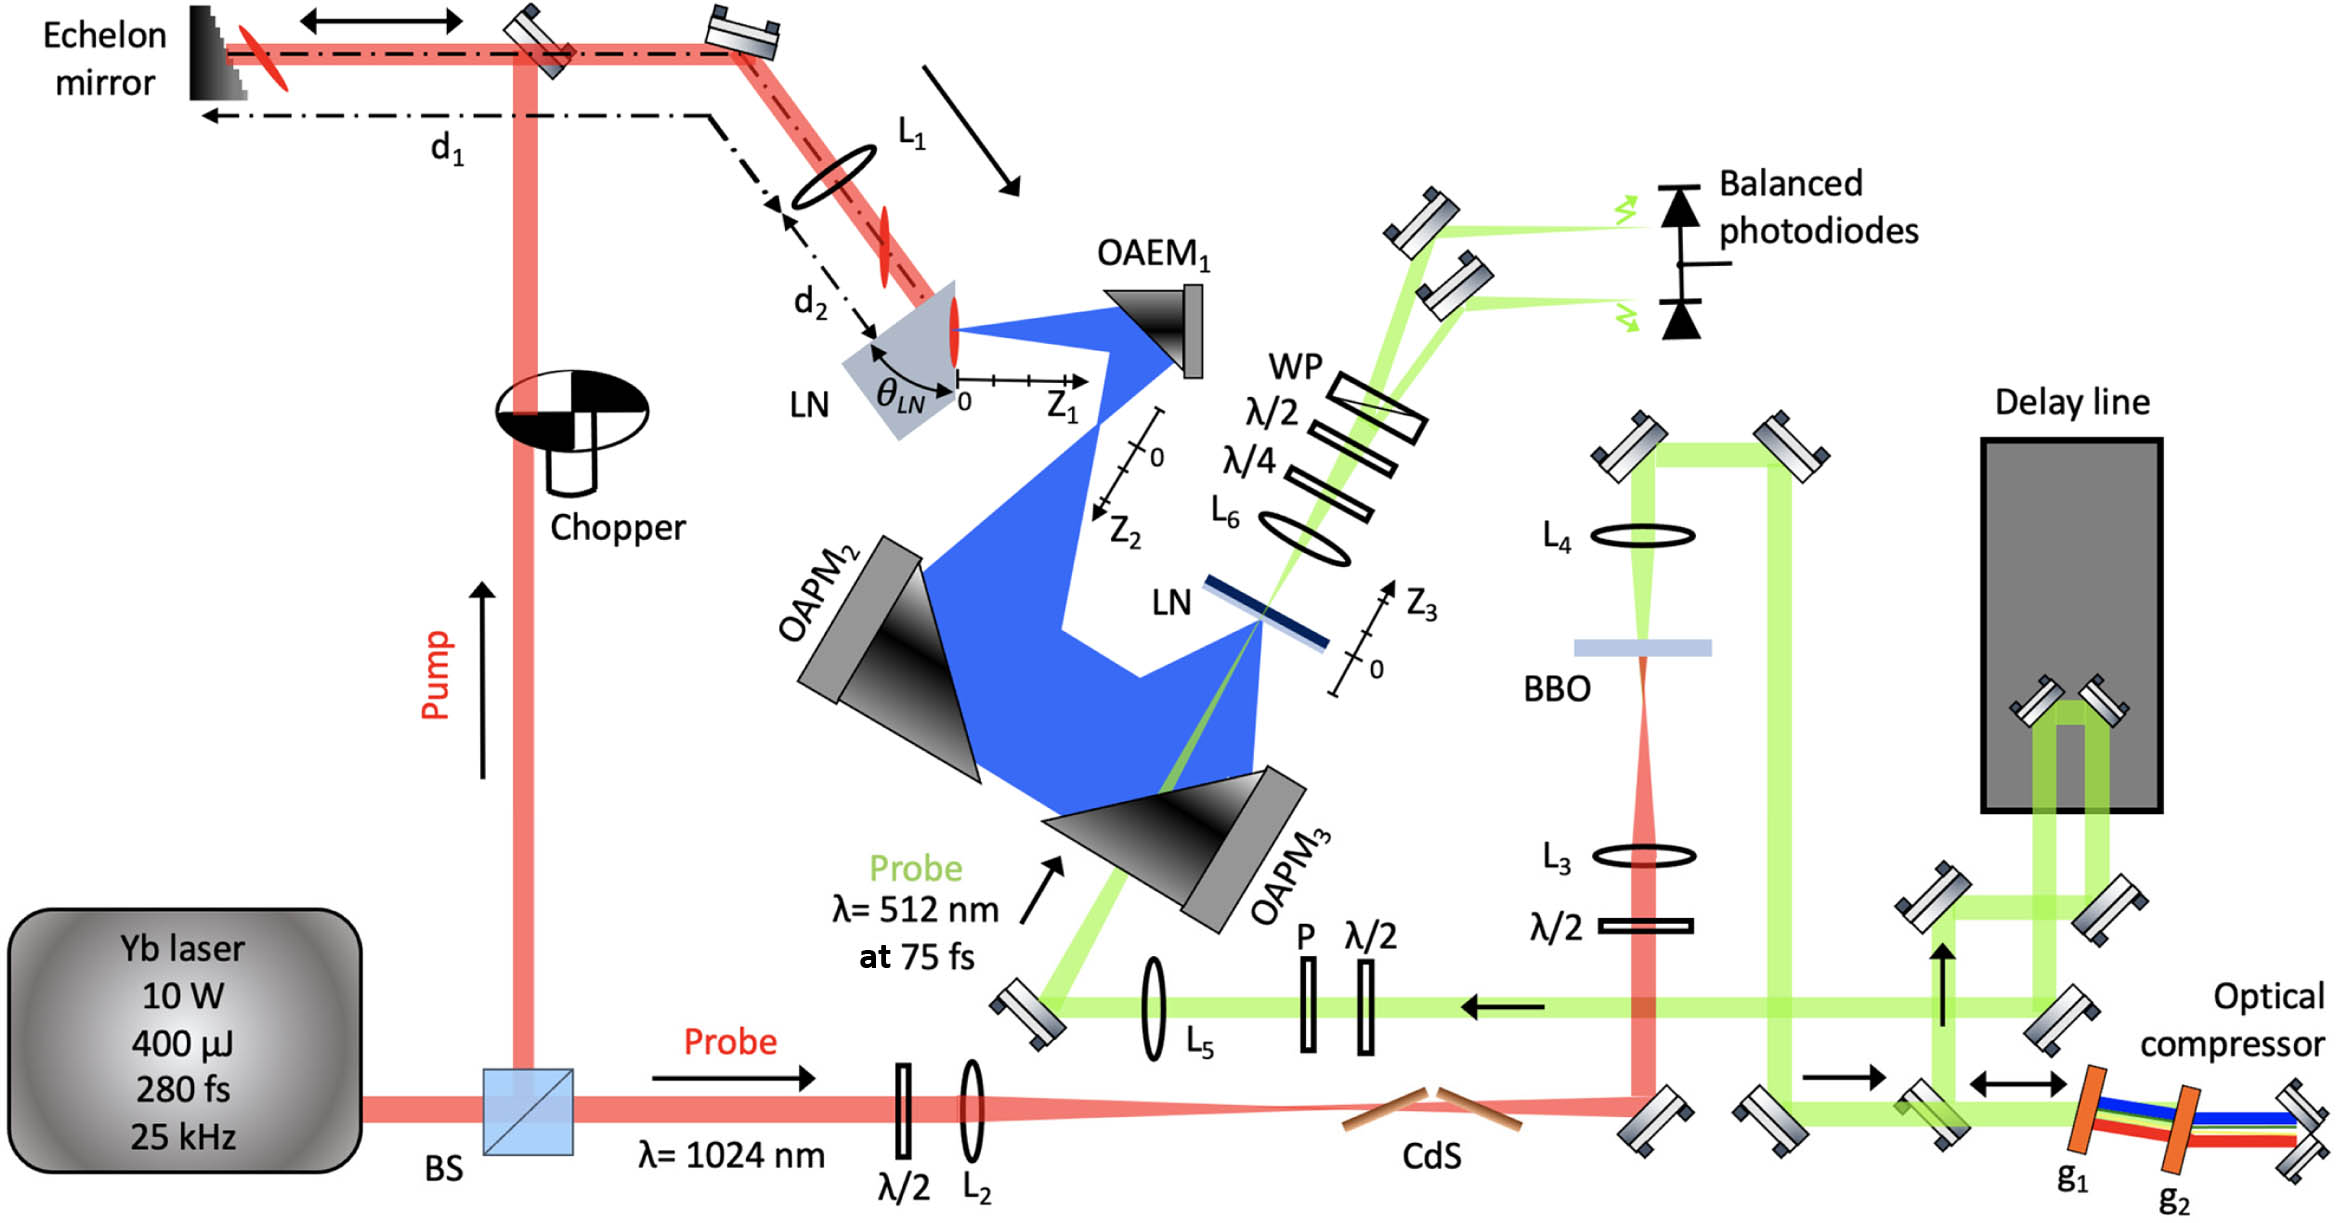 Experimental setup for the generation and detection of THz pulses with the LN and their detection by EO sampling. BS, beam splitter; M1, plane mirror reflecting the pump beam to the stair-step echelon mirror. The beam reflected by the echelon passes over M1; d1, 550 mm; d2, 125 mm; θLN, LN cut angle of 63°; L1, 100 mm focal length lens; L2, 300 mm focal length lens; L3, 50 mm focal length lens; L4, 75 mm focal length lens; L5, 100 mm focal length lens; L6, 150 mm focal length lens; OAEM1, OAEM with 83.82 mm image distance and 33.02 mm object distance; OAPM2, 100 mm reflected focal length off-axis parabolic mirror; OAPM3, 50 mm reflected focal length off-axis parabolic mirror; g1 and g2, transmissive diffracting gratings with 300 grooves/mm; λ/2, half-wave plate; λ/4, quarter-wave plate; WP, Wollaston prism; P, polarizer.